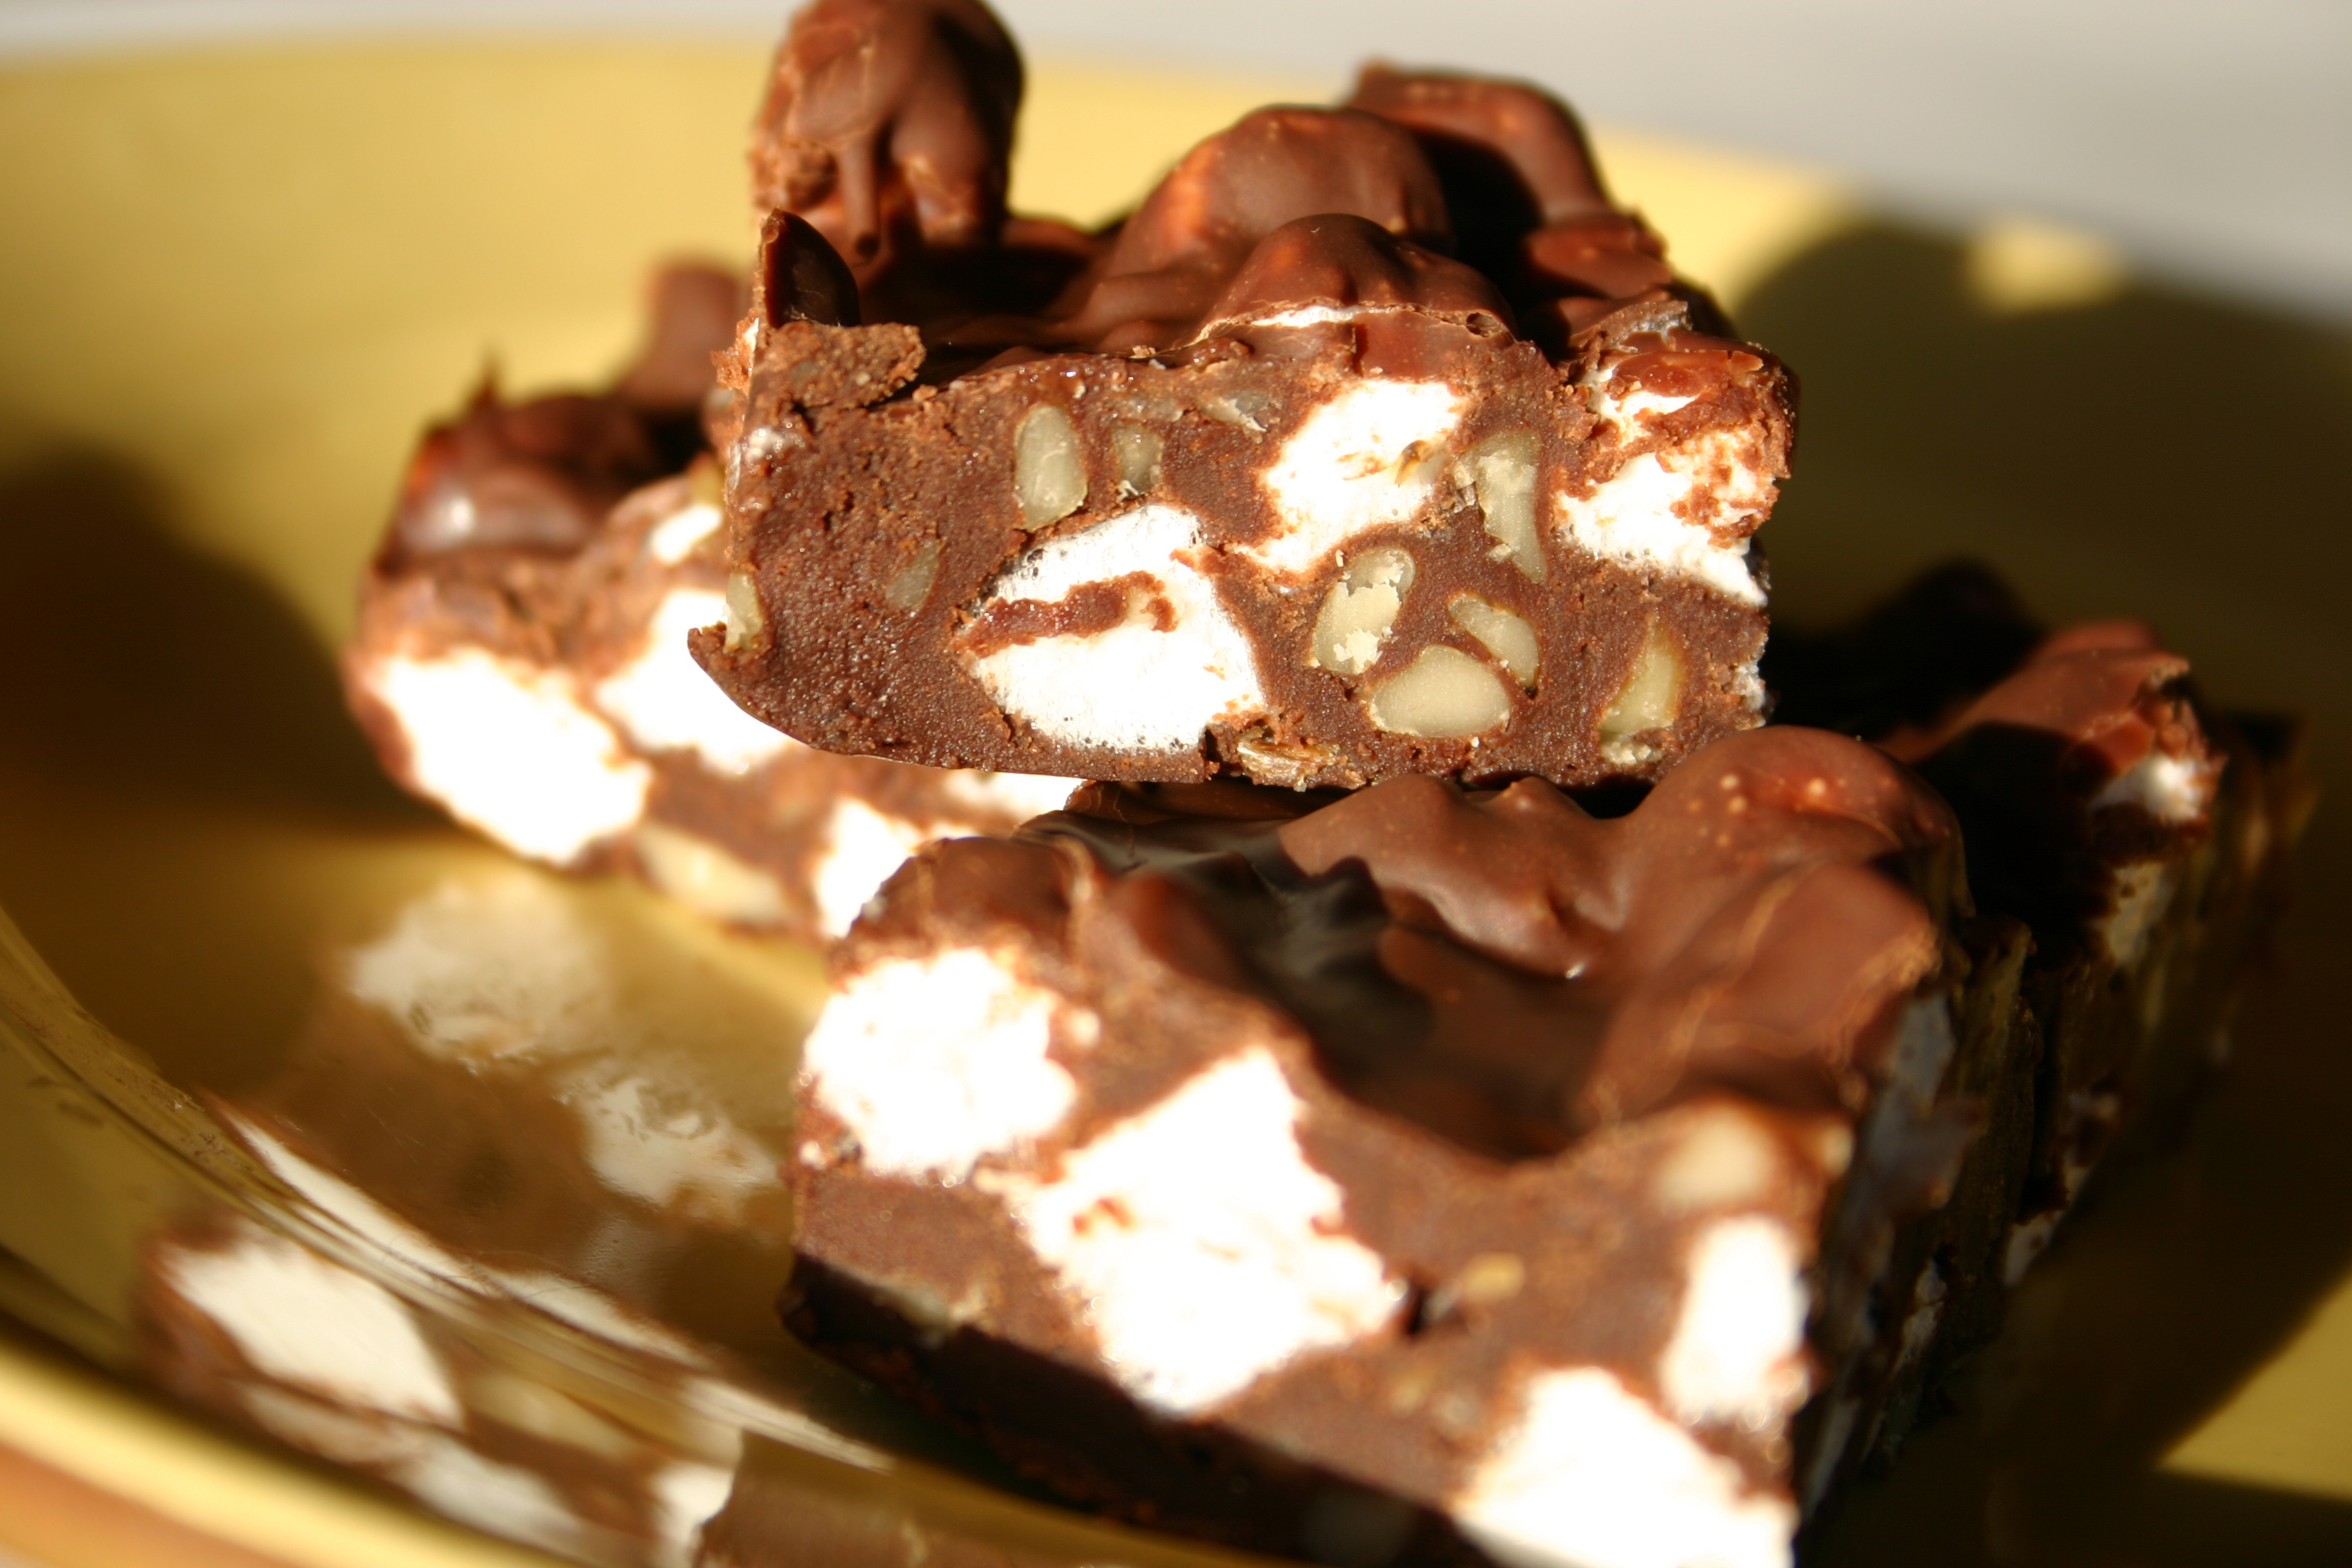 Close-up of a rocky road chocolate bar with marshmallows and nuts on a plate